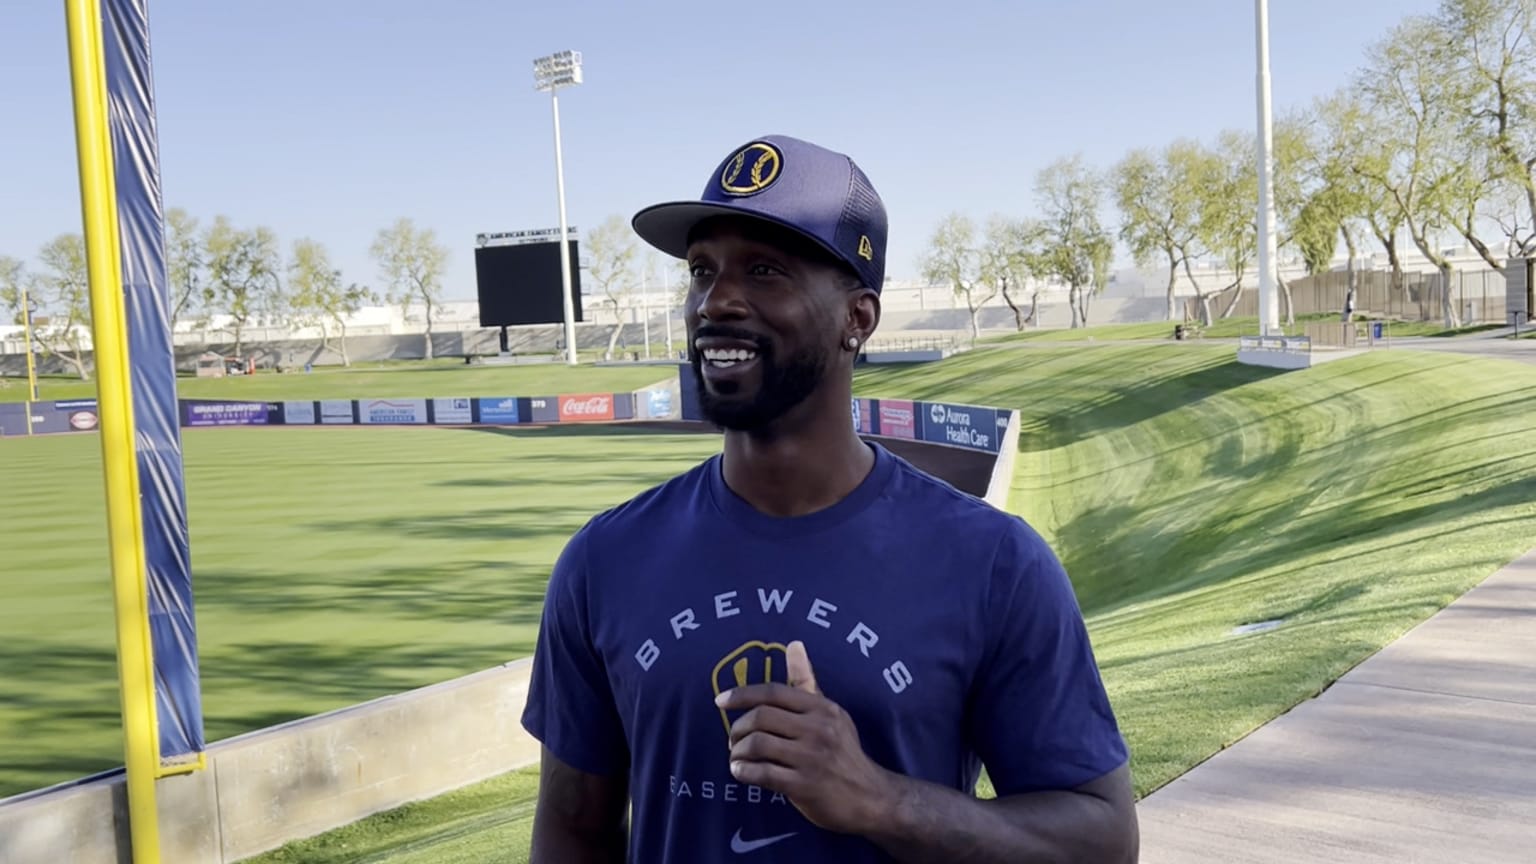 MLB® The Show™ - Andrew McCutchen Collection, “The Overhaul” Roster Update,  and new All-Star content in MLB® The Show™ 22